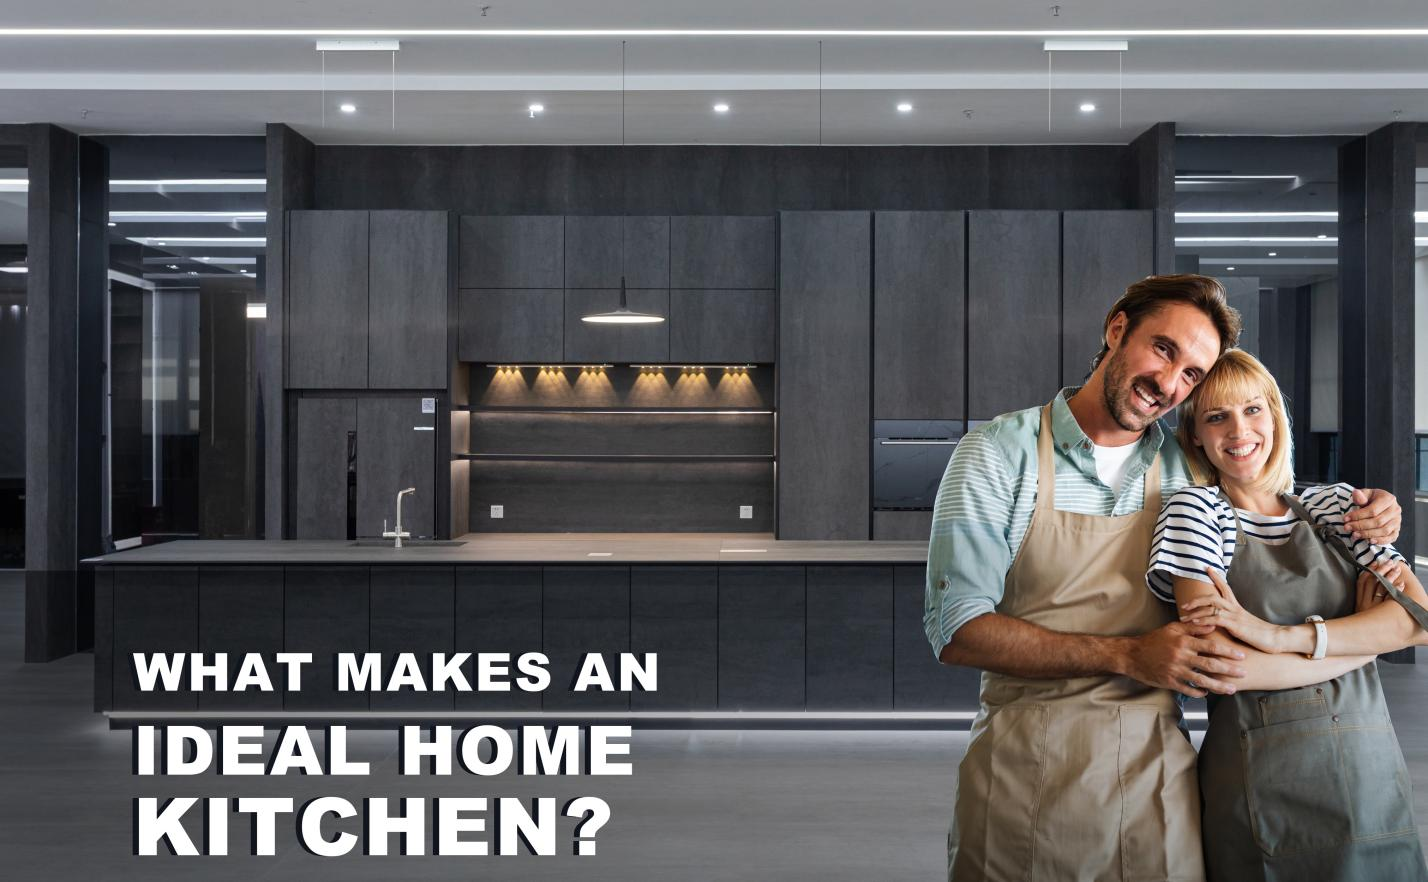 What is a smart kitchen? 2